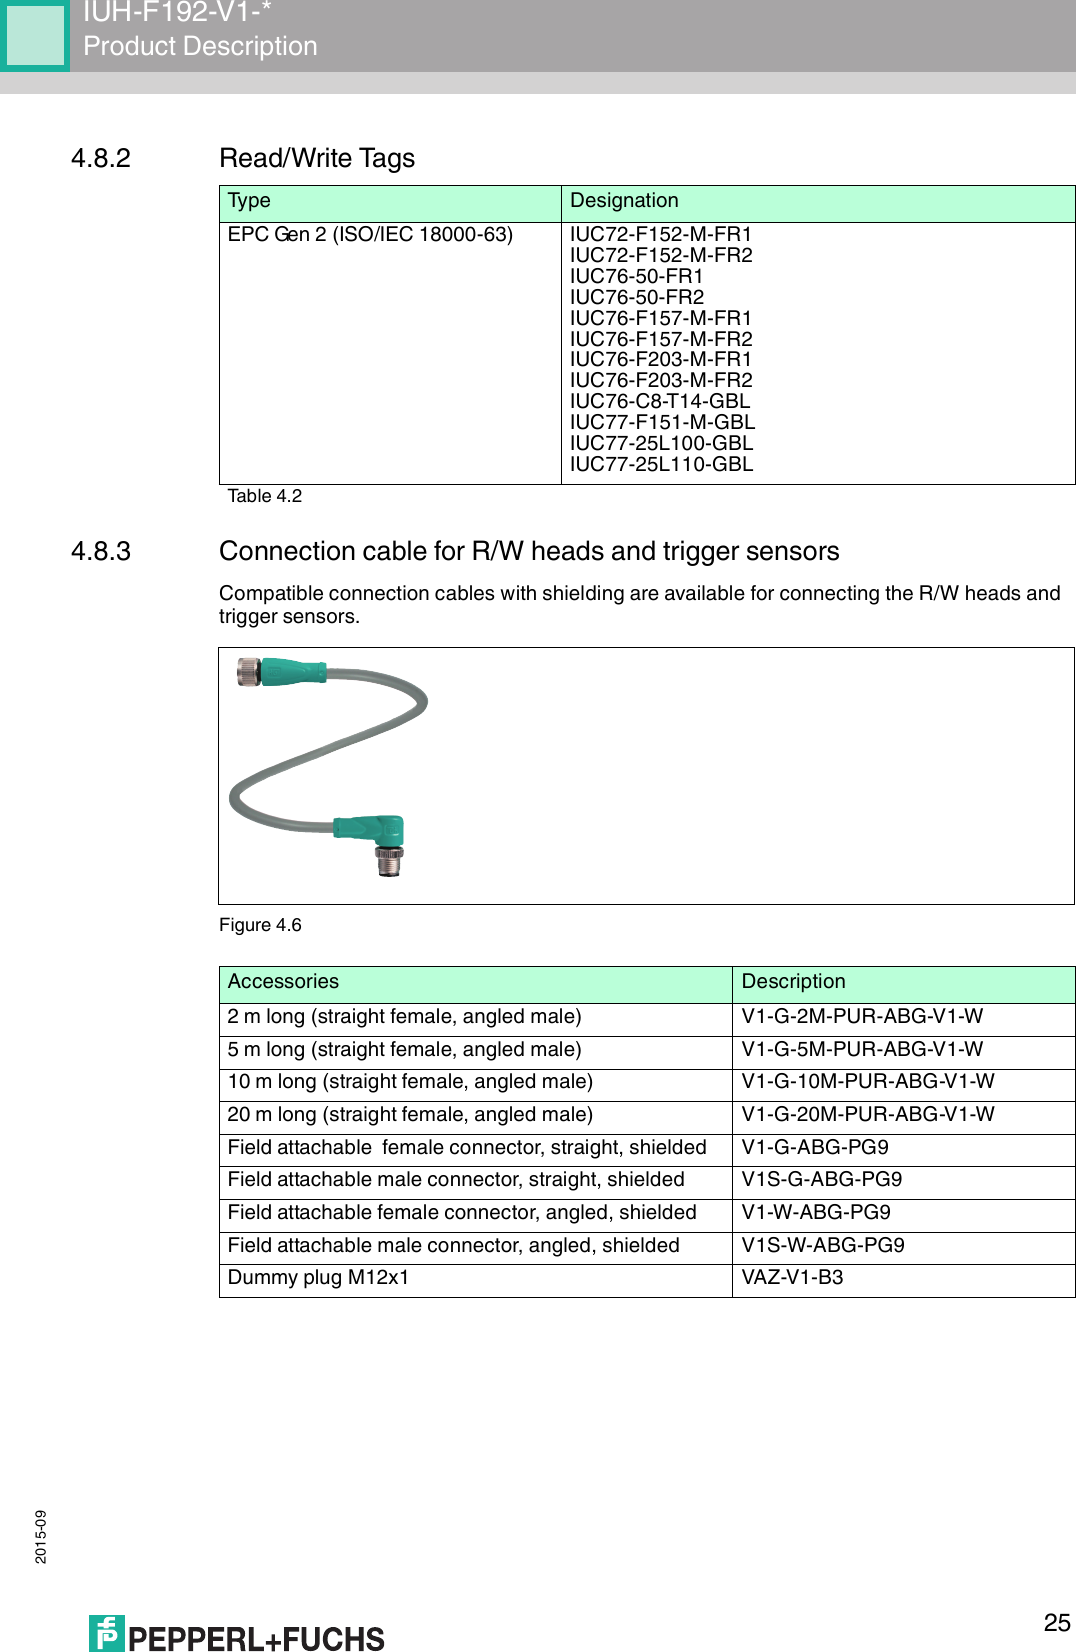 IUH-F192-V1-*Product Description 2015-09254.8.2 Read/Write Tags4.8.3 Connection cable for R/W heads and trigger sensorsCompatible connection cables with shielding are available for connecting the R/W heads and trigger sensors.Figure 4.6Type DesignationEPC Gen 2 (ISO/IEC 18000-63) IUC72-F152-M-FR1IUC72-F152-M-FR2IUC76-50-FR1IUC76-50-FR2IUC76-F157-M-FR1IUC76-F157-M-FR2IUC76-F203-M-FR1IUC76-F203-M-FR2IUC76-C8-T14-GBLIUC77-F151-M-GBLIUC77-25L100-GBLIUC77-25L110-GBLTable 4.2Accessories Description2 m long (straight female, angled male) V1-G-2M-PUR-ABG-V1-W5 m long (straight female, angled male) V1-G-5M-PUR-ABG-V1-W10 m long (straight female, angled male) V1-G-10M-PUR-ABG-V1-W20 m long (straight female, angled male) V1-G-20M-PUR-ABG-V1-WField attachable  female connector, straight, shielded V1-G-ABG-PG9Field attachable male connector, straight, shielded V1S-G-ABG-PG9Field attachable female connector, angled, shielded V1-W-ABG-PG9Field attachable male connector, angled, shielded V1S-W-ABG-PG9Dummy plug M12x1 VAZ-V1-B3